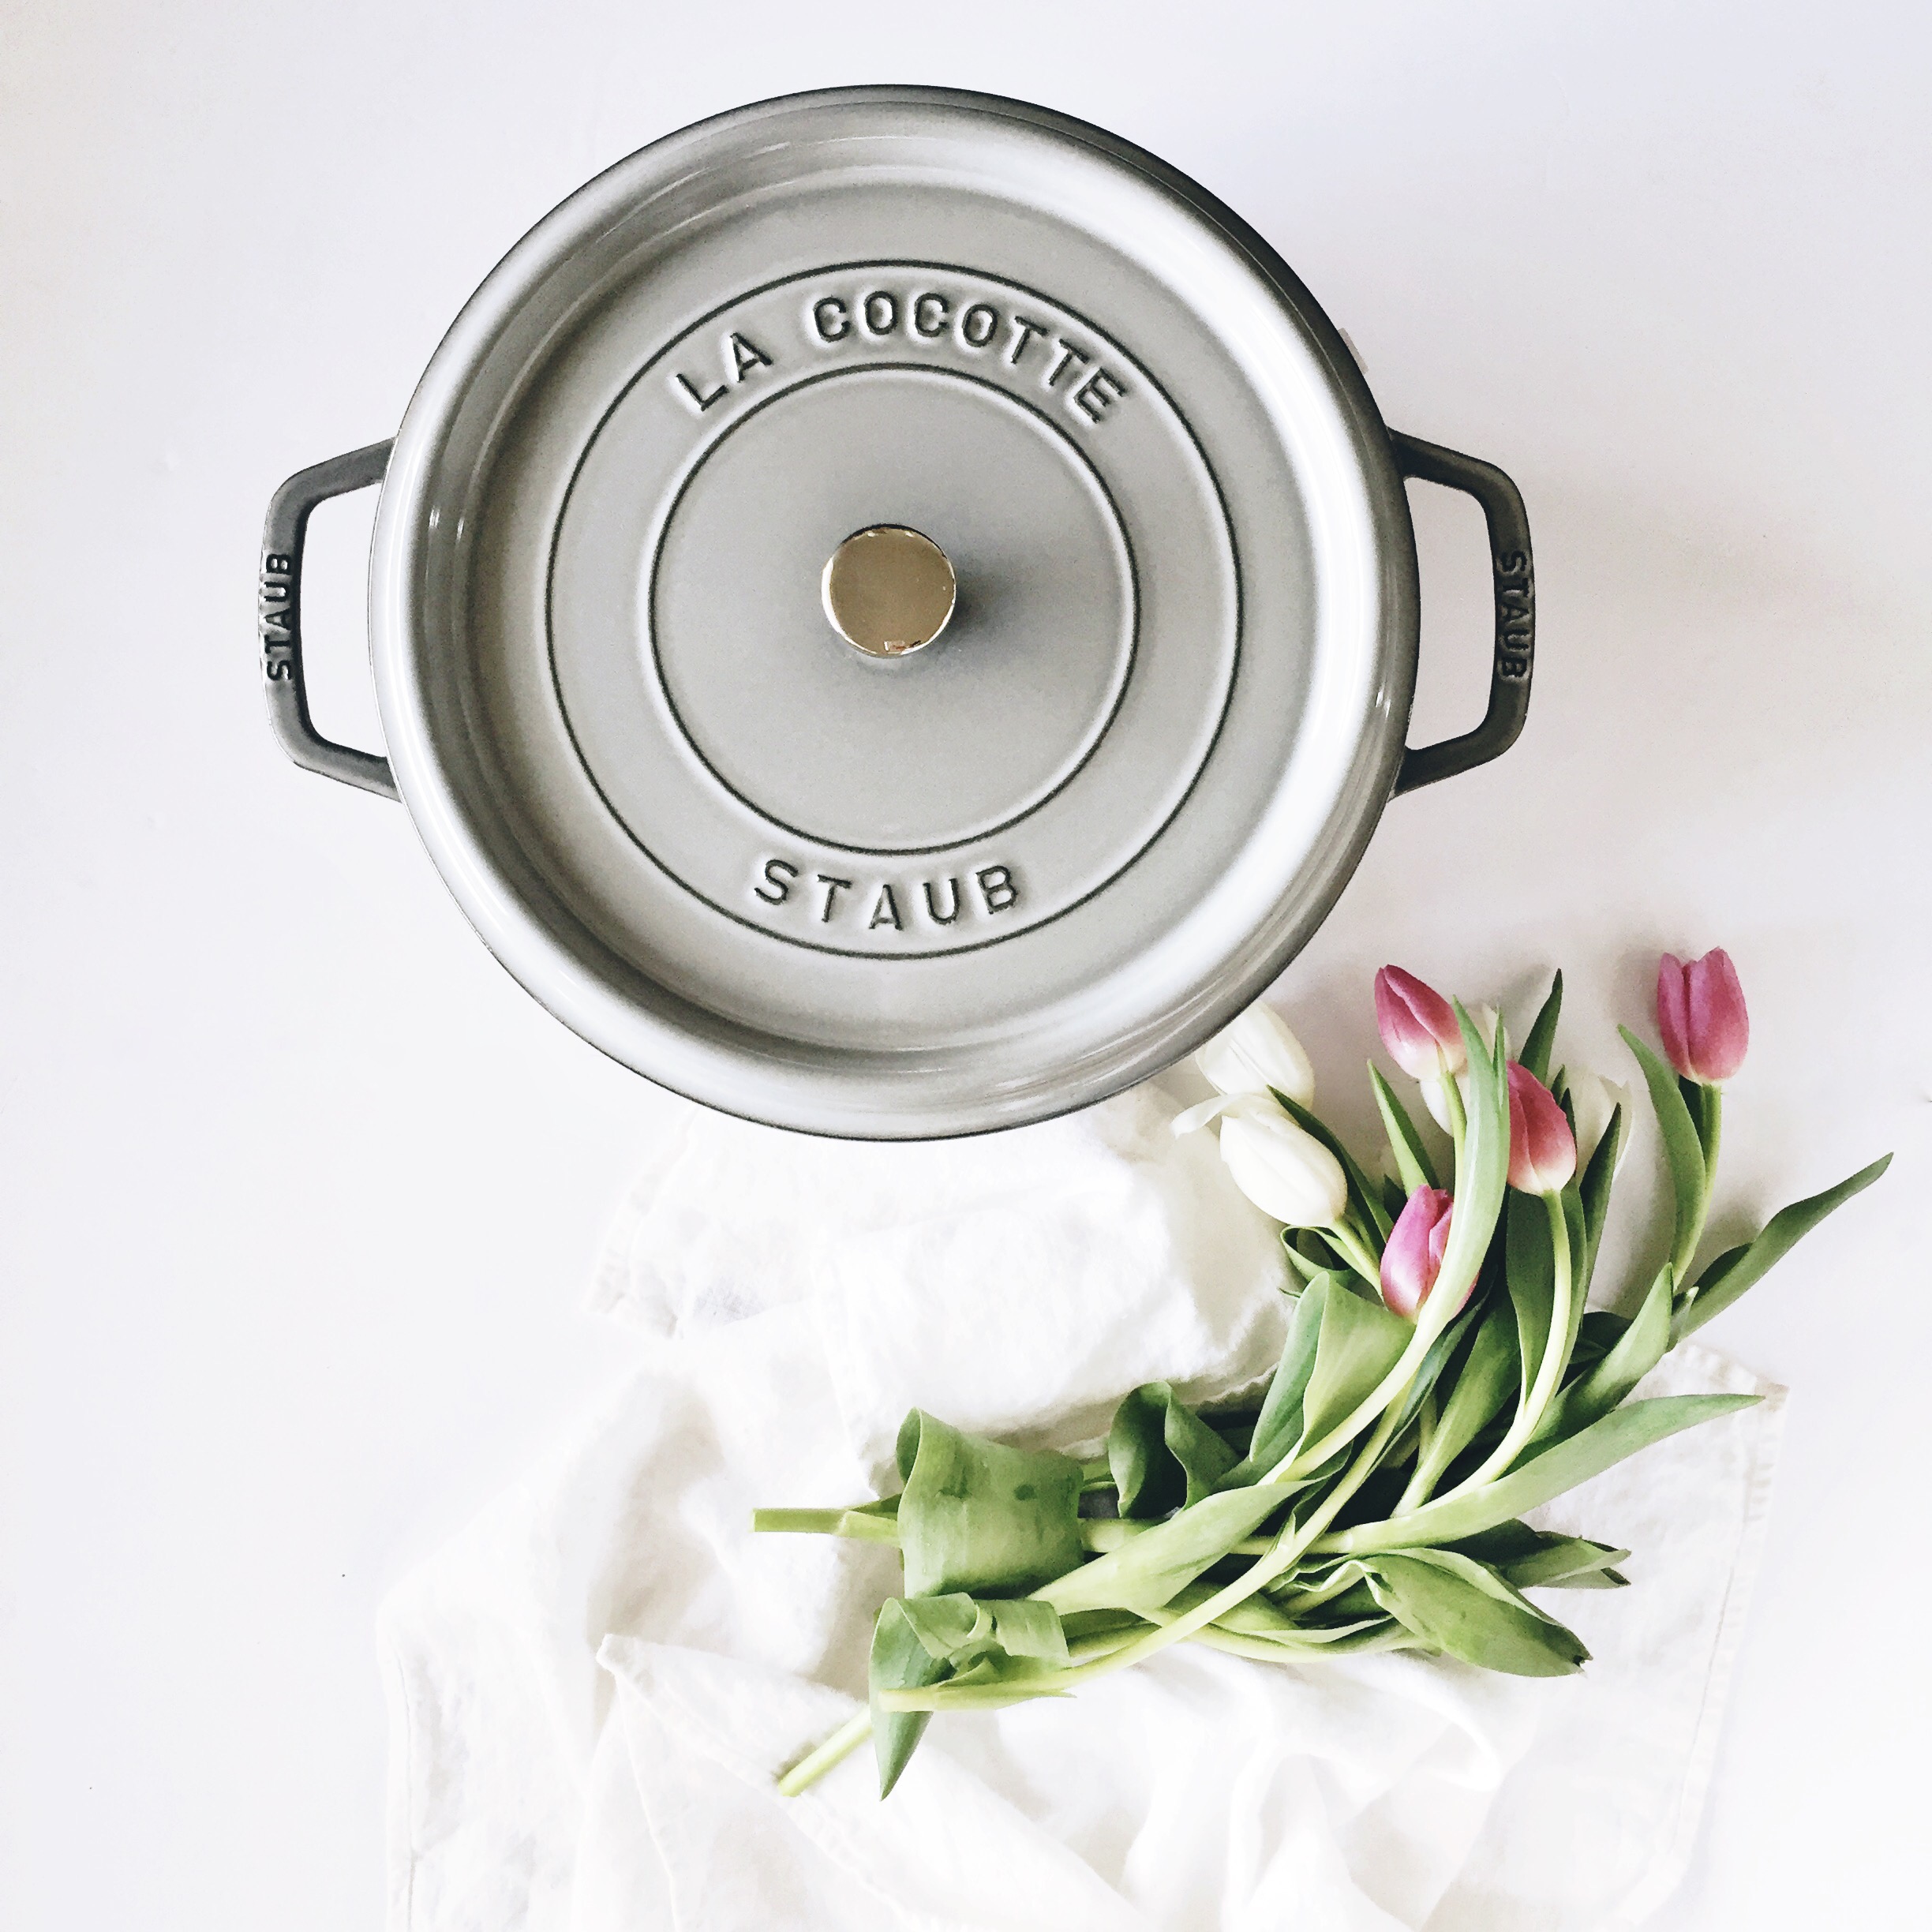 Staub Cocotte and tulips